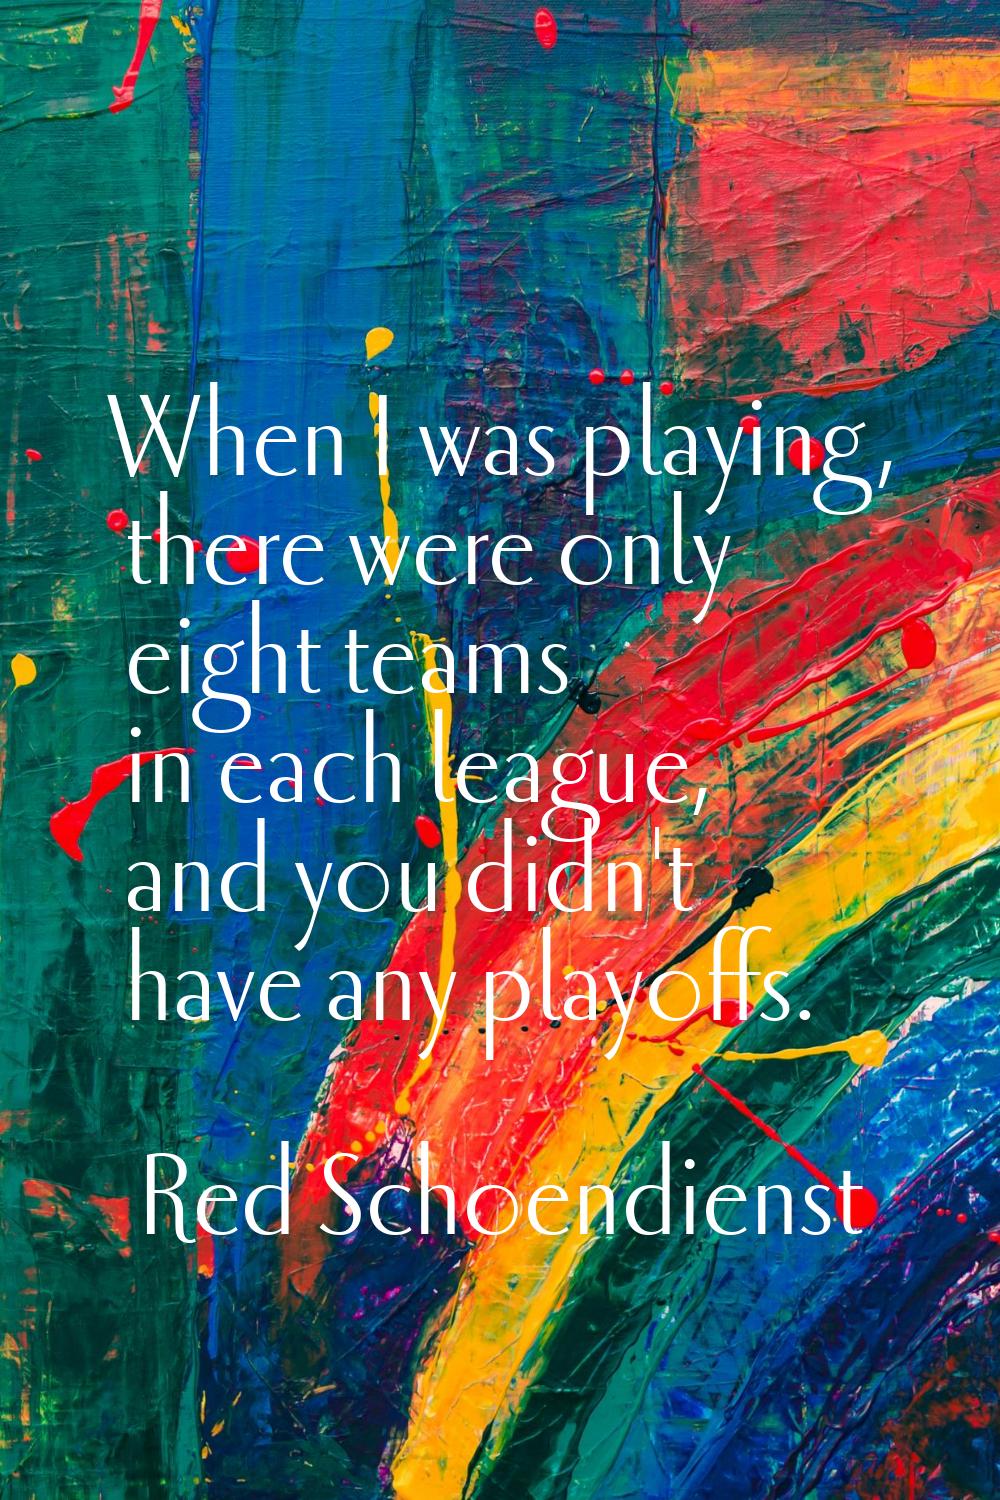 When I was playing, there were only eight teams in each league, and you didn't have any playoffs.